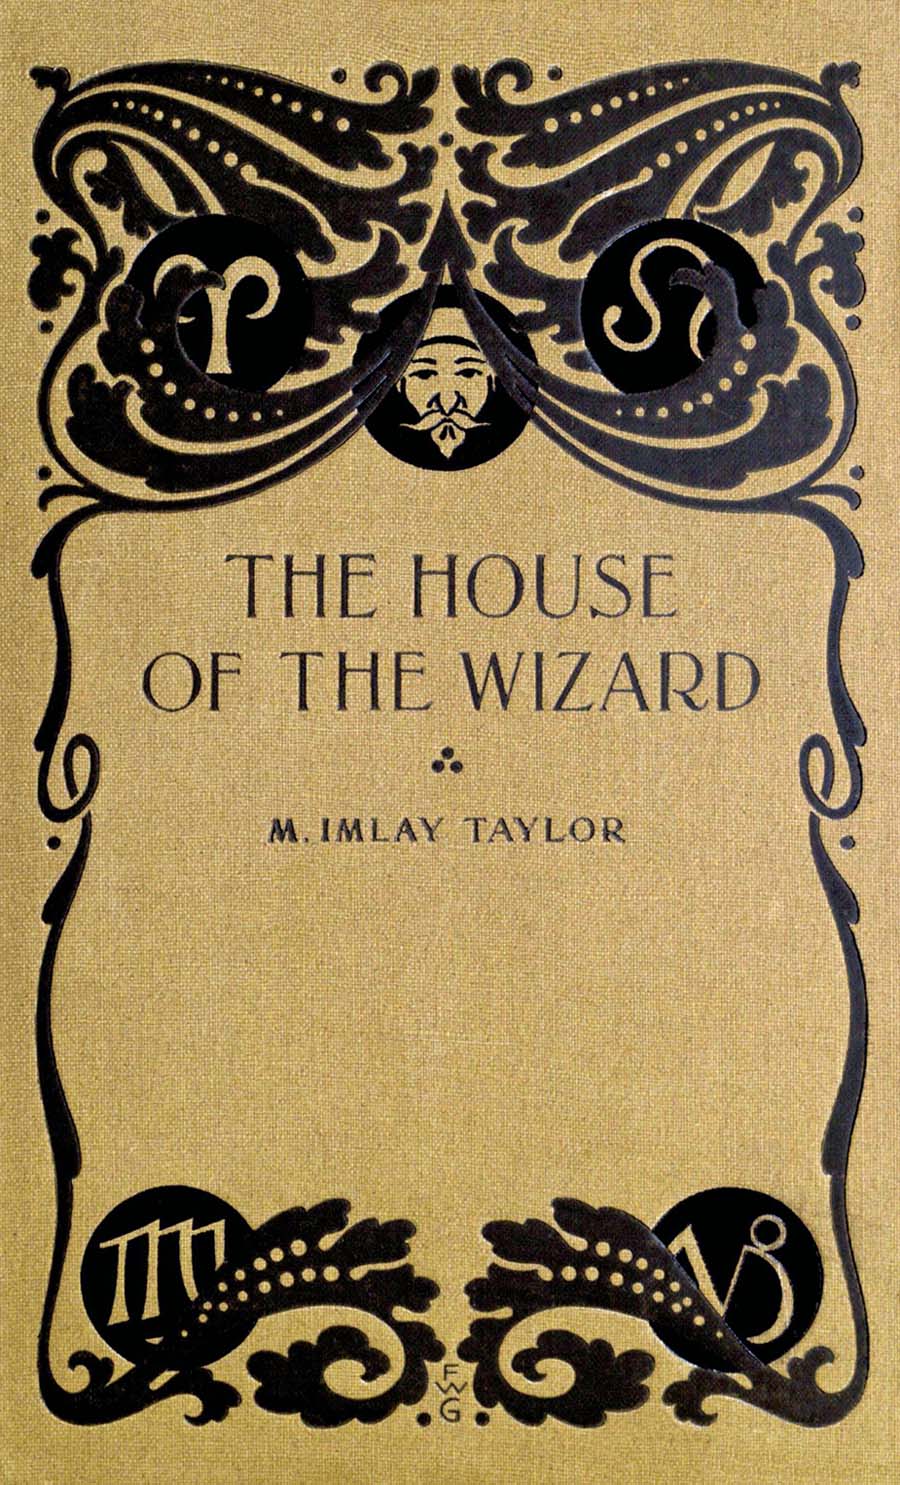 The house of the wizard